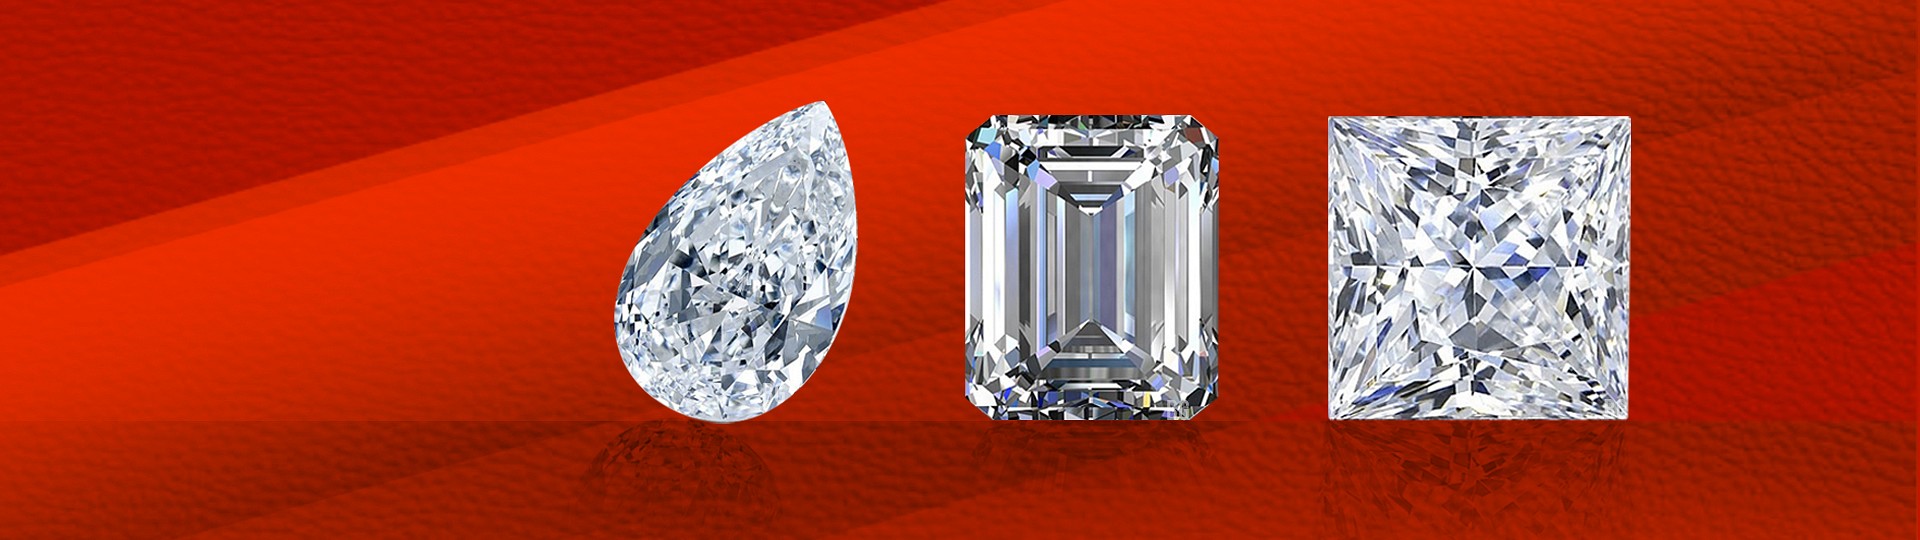 NO RESERVE LOTS - GIA Investment Diamonds | Day 1 by Bid Global International Auctioneers LLC